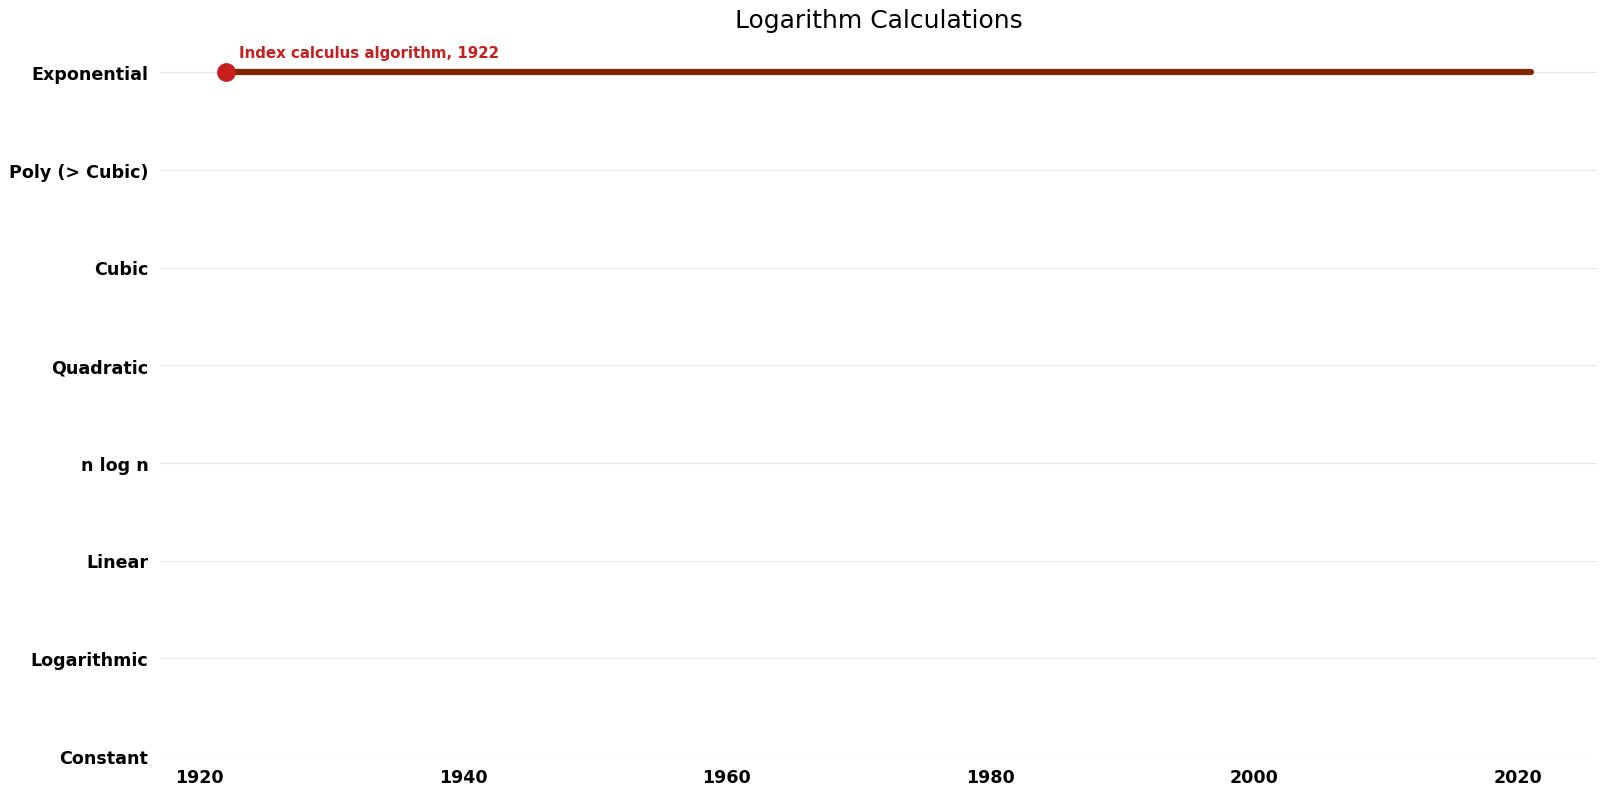 File:Logarithm Calculations - Time.png